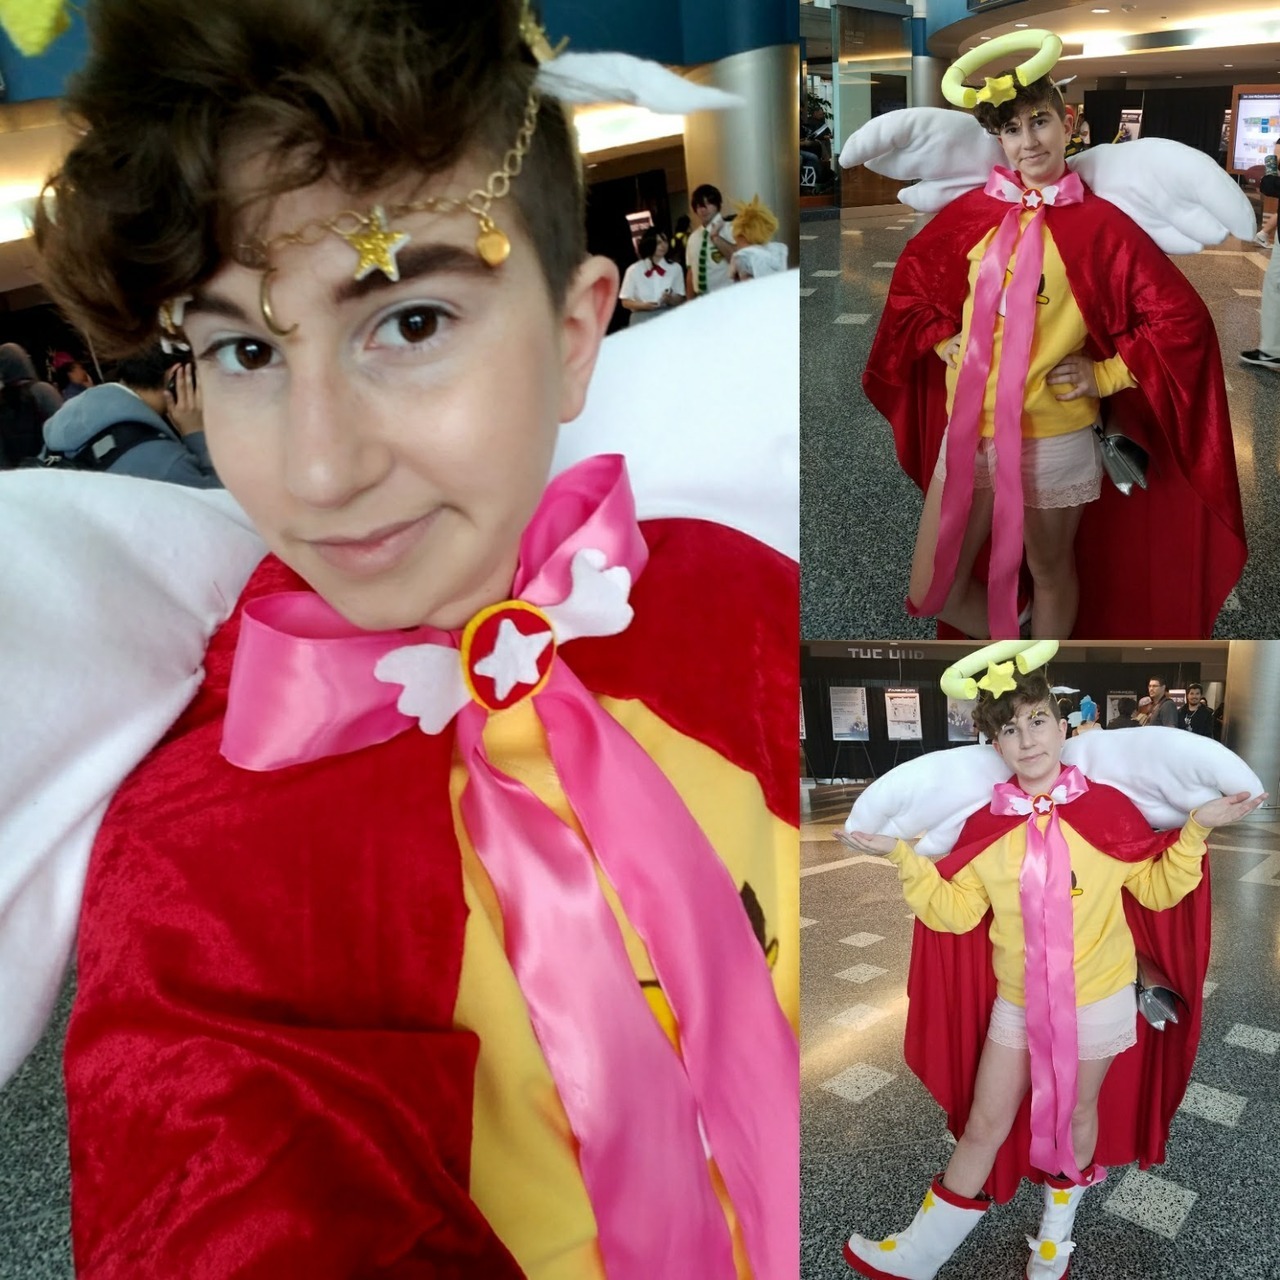 cartoonhangover: Hey look! It’s gender-bent Bee IRL! Thank you, @the-punk-innovator​, for sending us your awesome cosplay!…